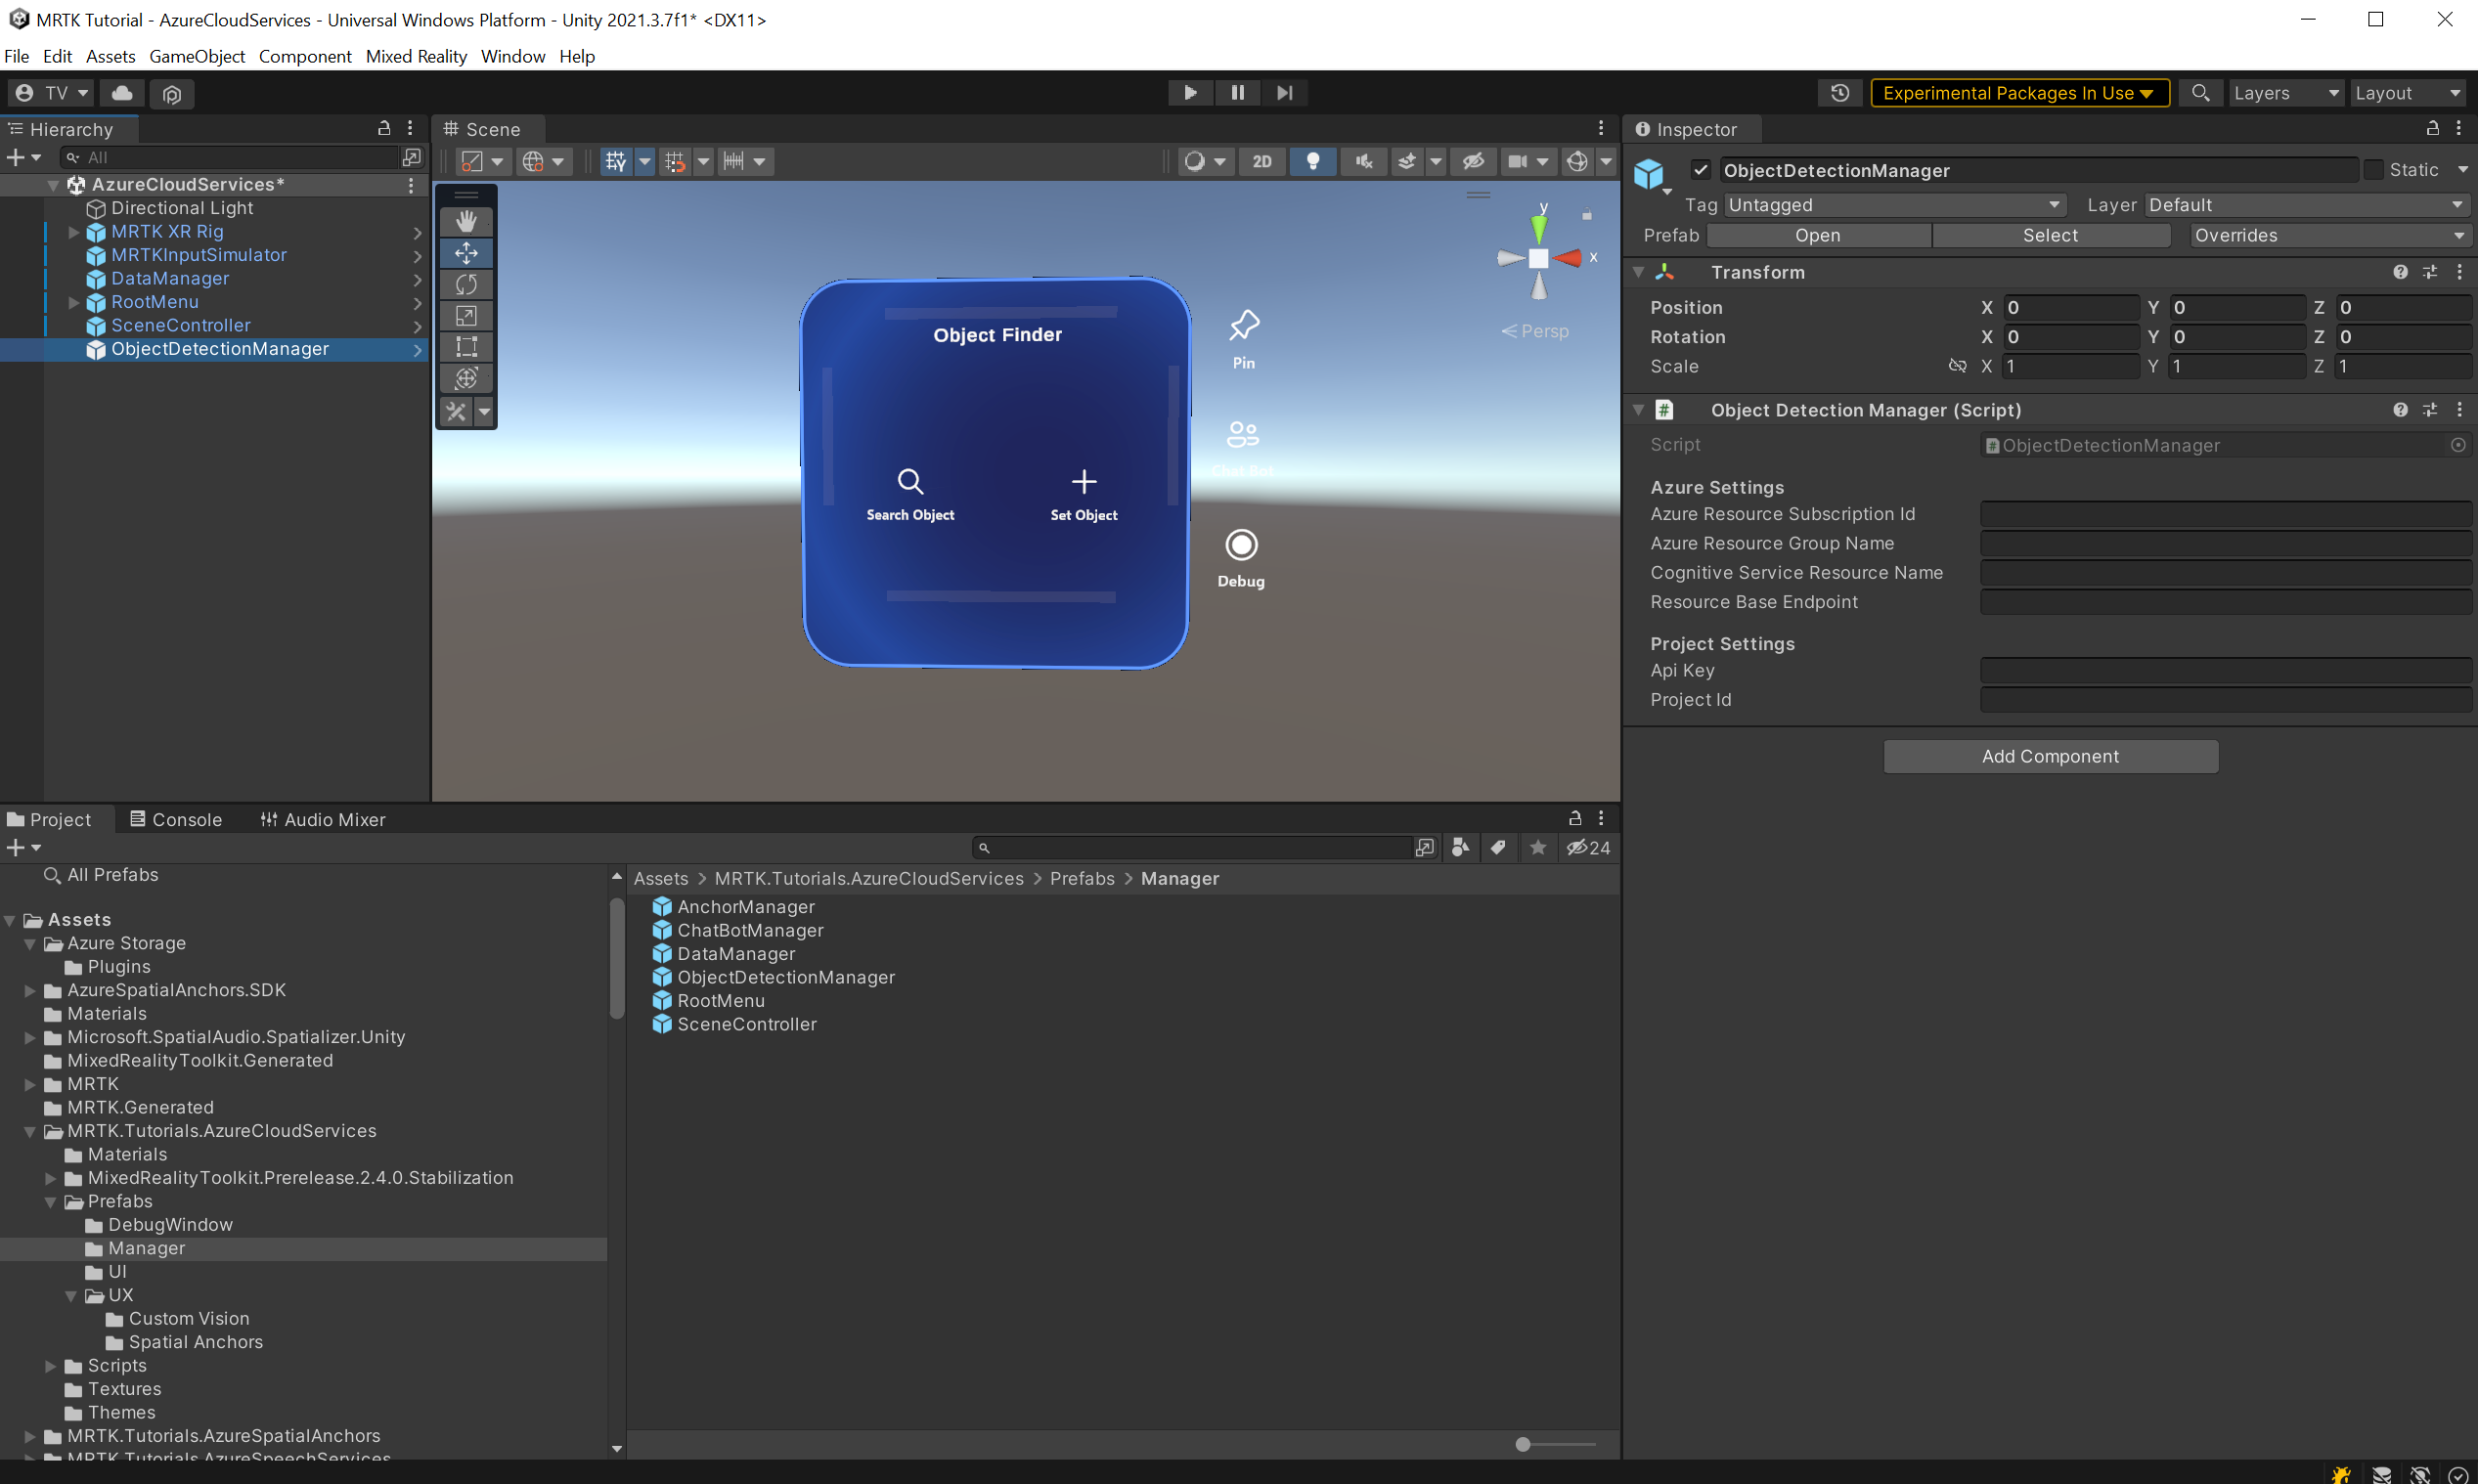 Screenshot of Unity with ObjectDetectionManager script component configuration fields shown in Inspector.